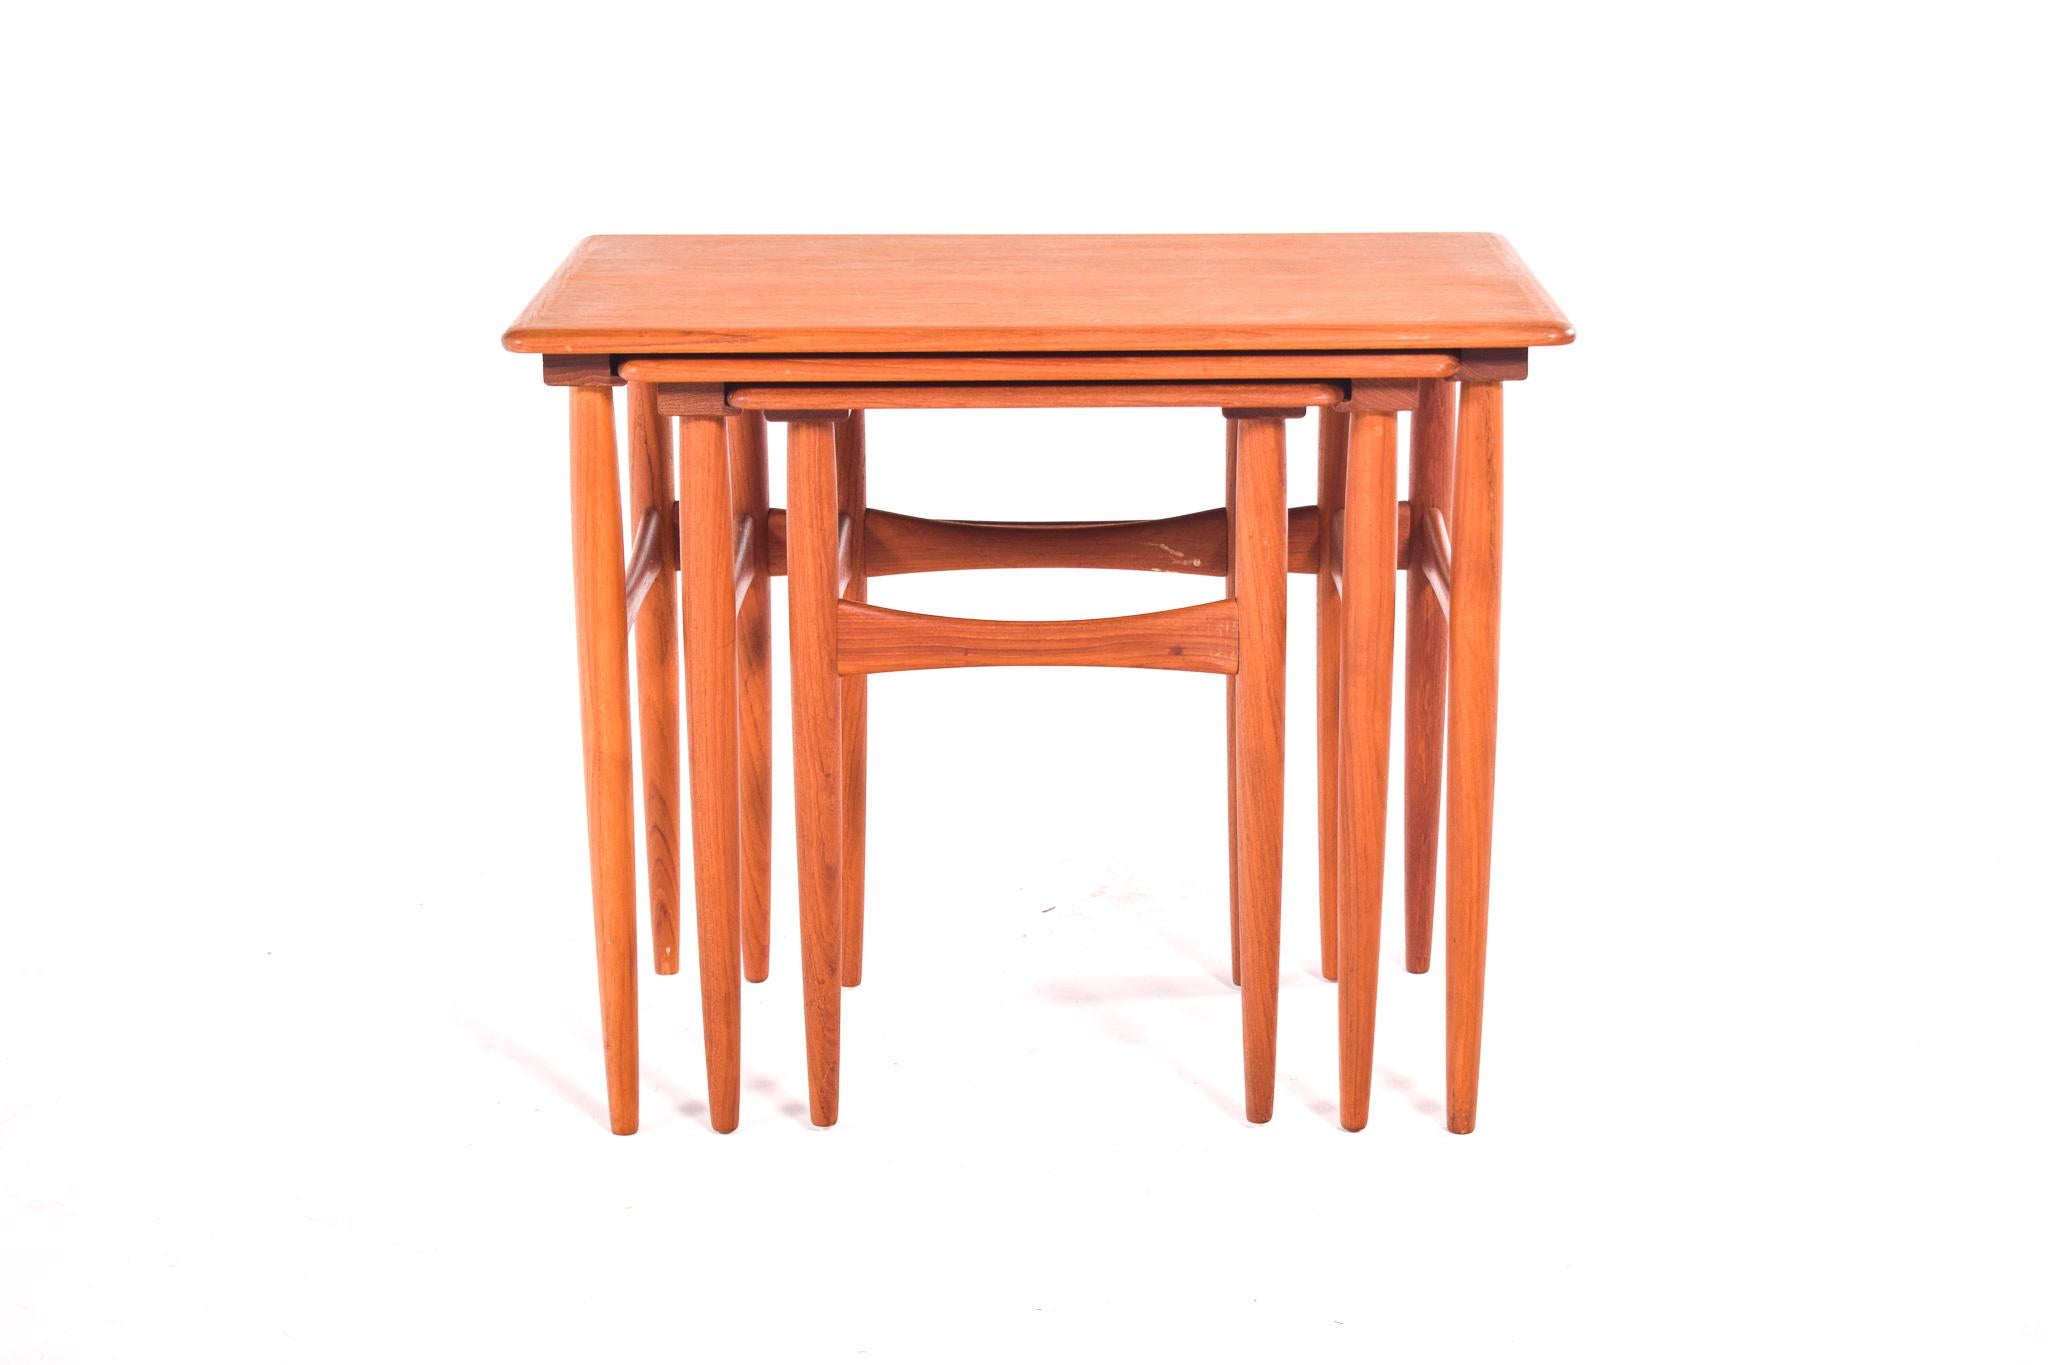 A set of three Danish modern teak nesting tables, 1960's. Beautiful tables, well designed by Kai Kristiansen. With tapered legs and bowtie stretchers. The tables slide easily into each other, so that they take up little space. Elegant piece to